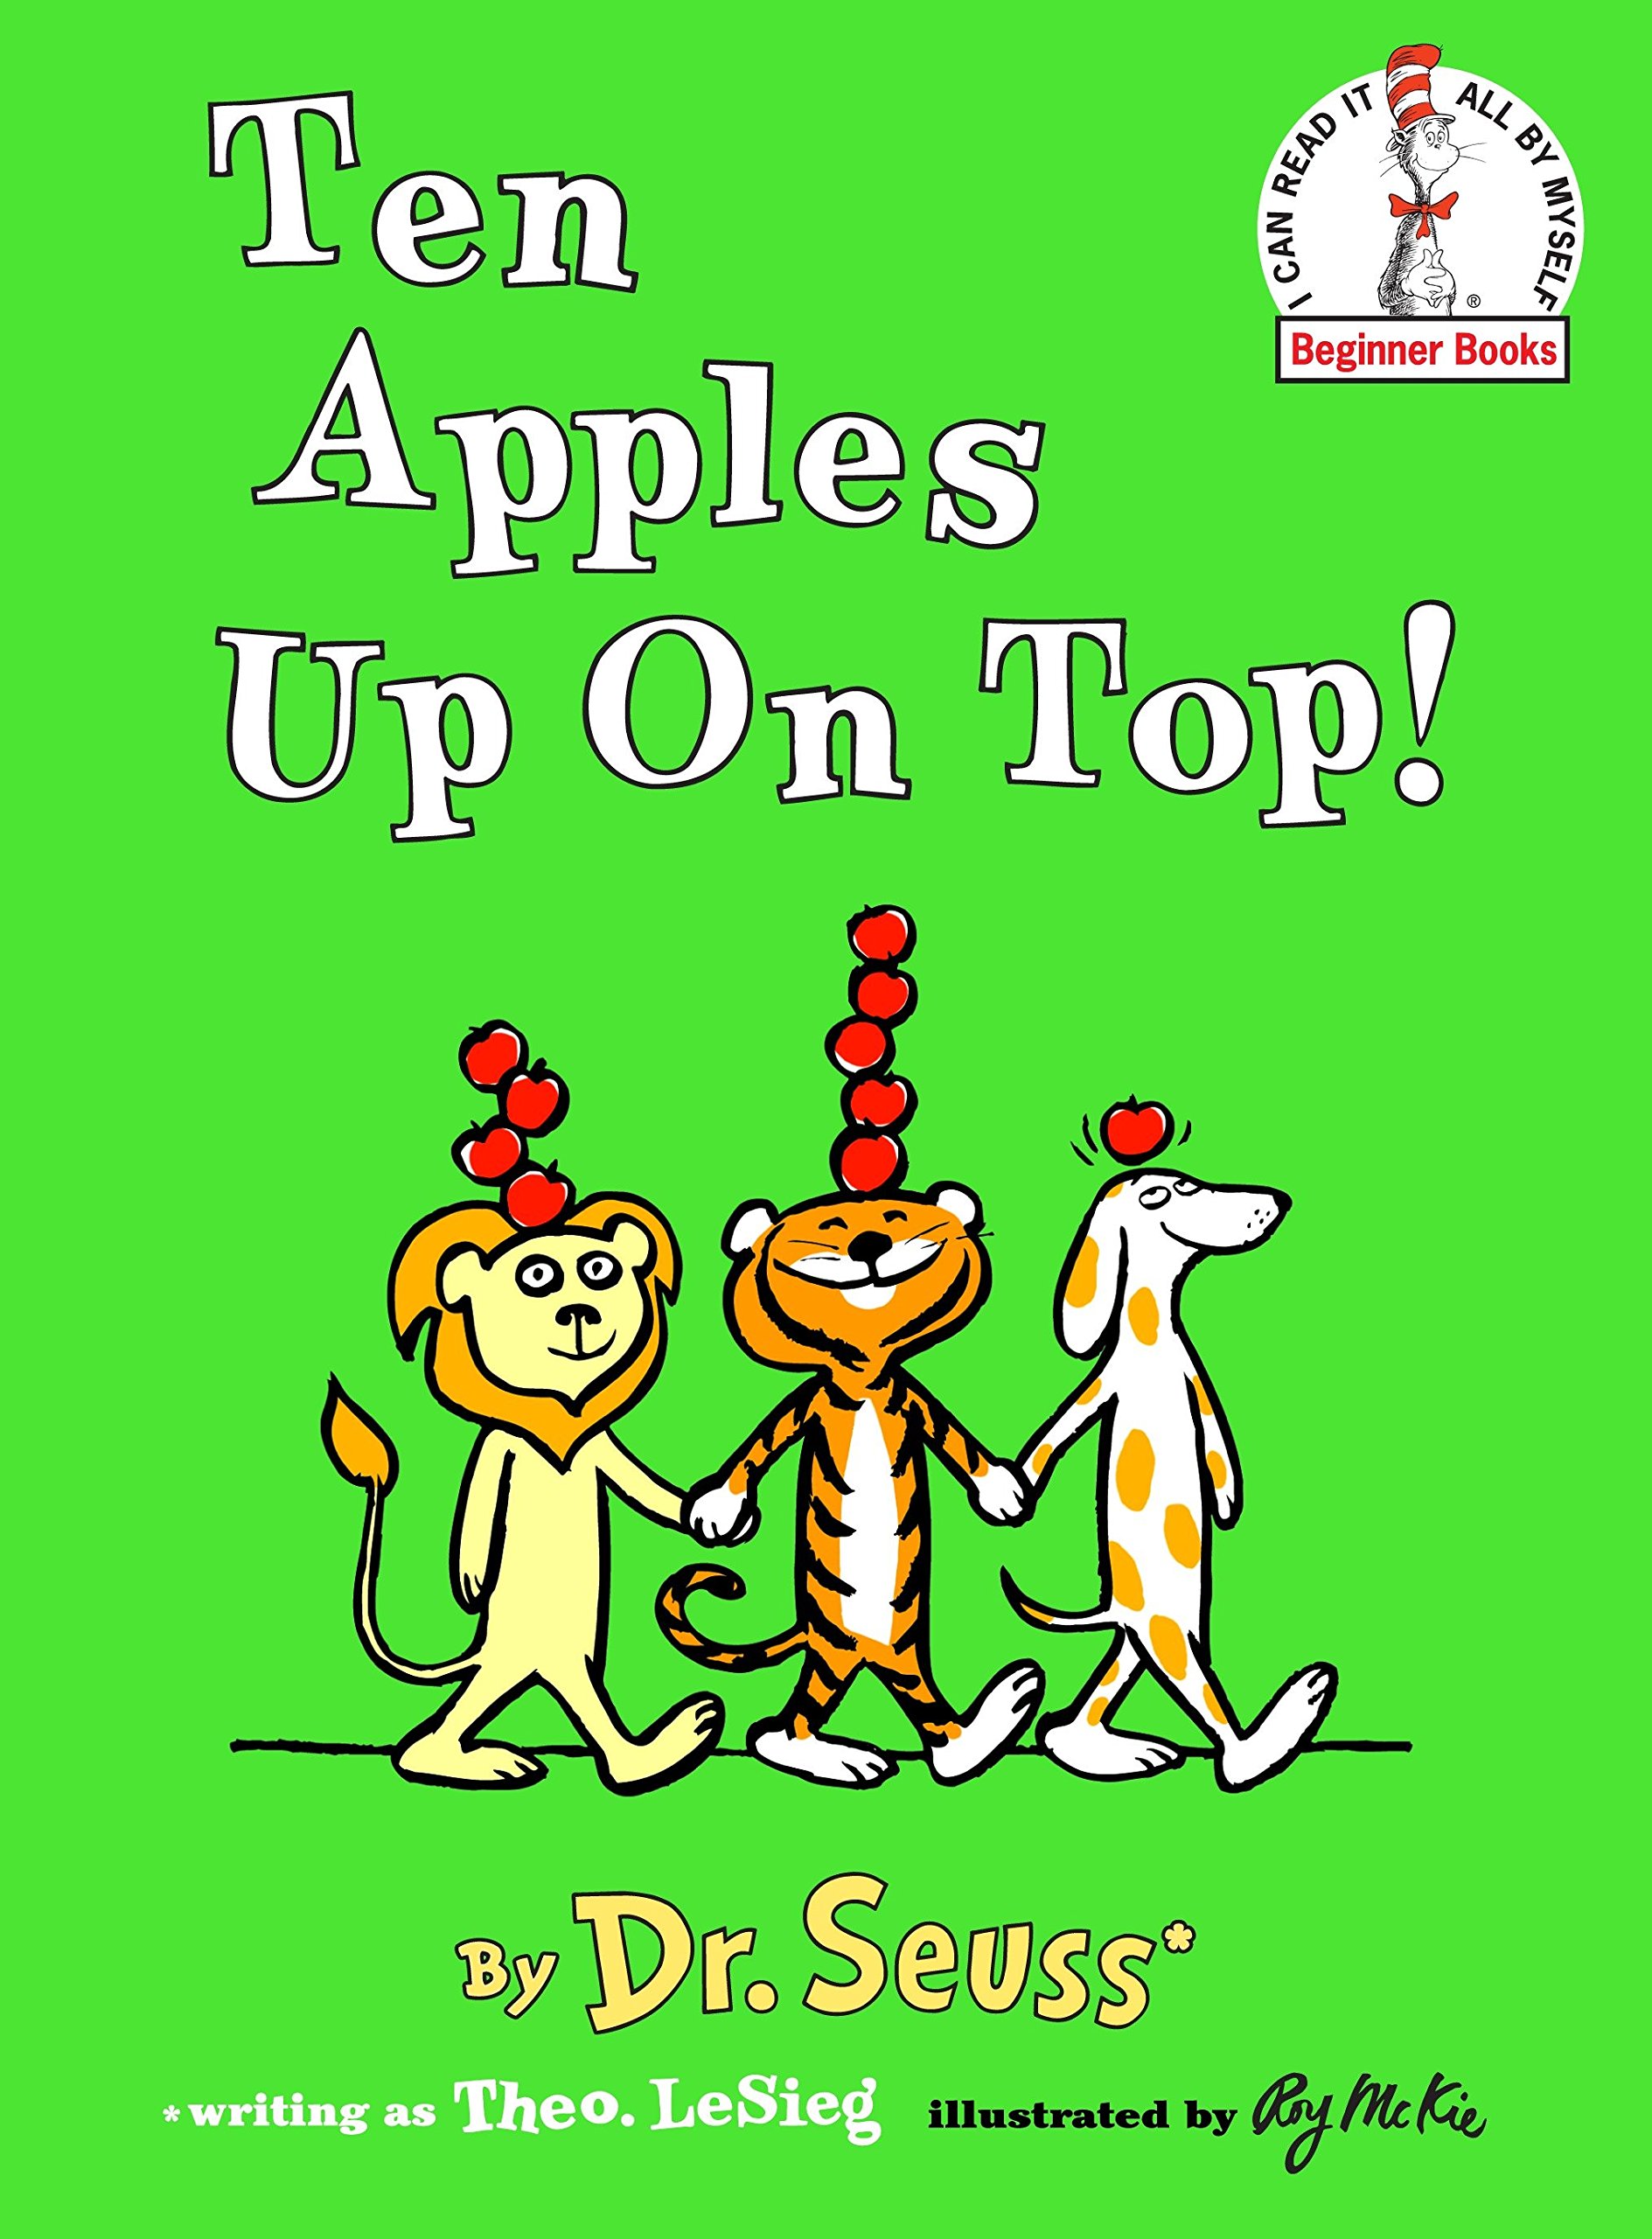 speech and language teaching concepts for Ten Apples Up On Top! in speech therapy​ ​